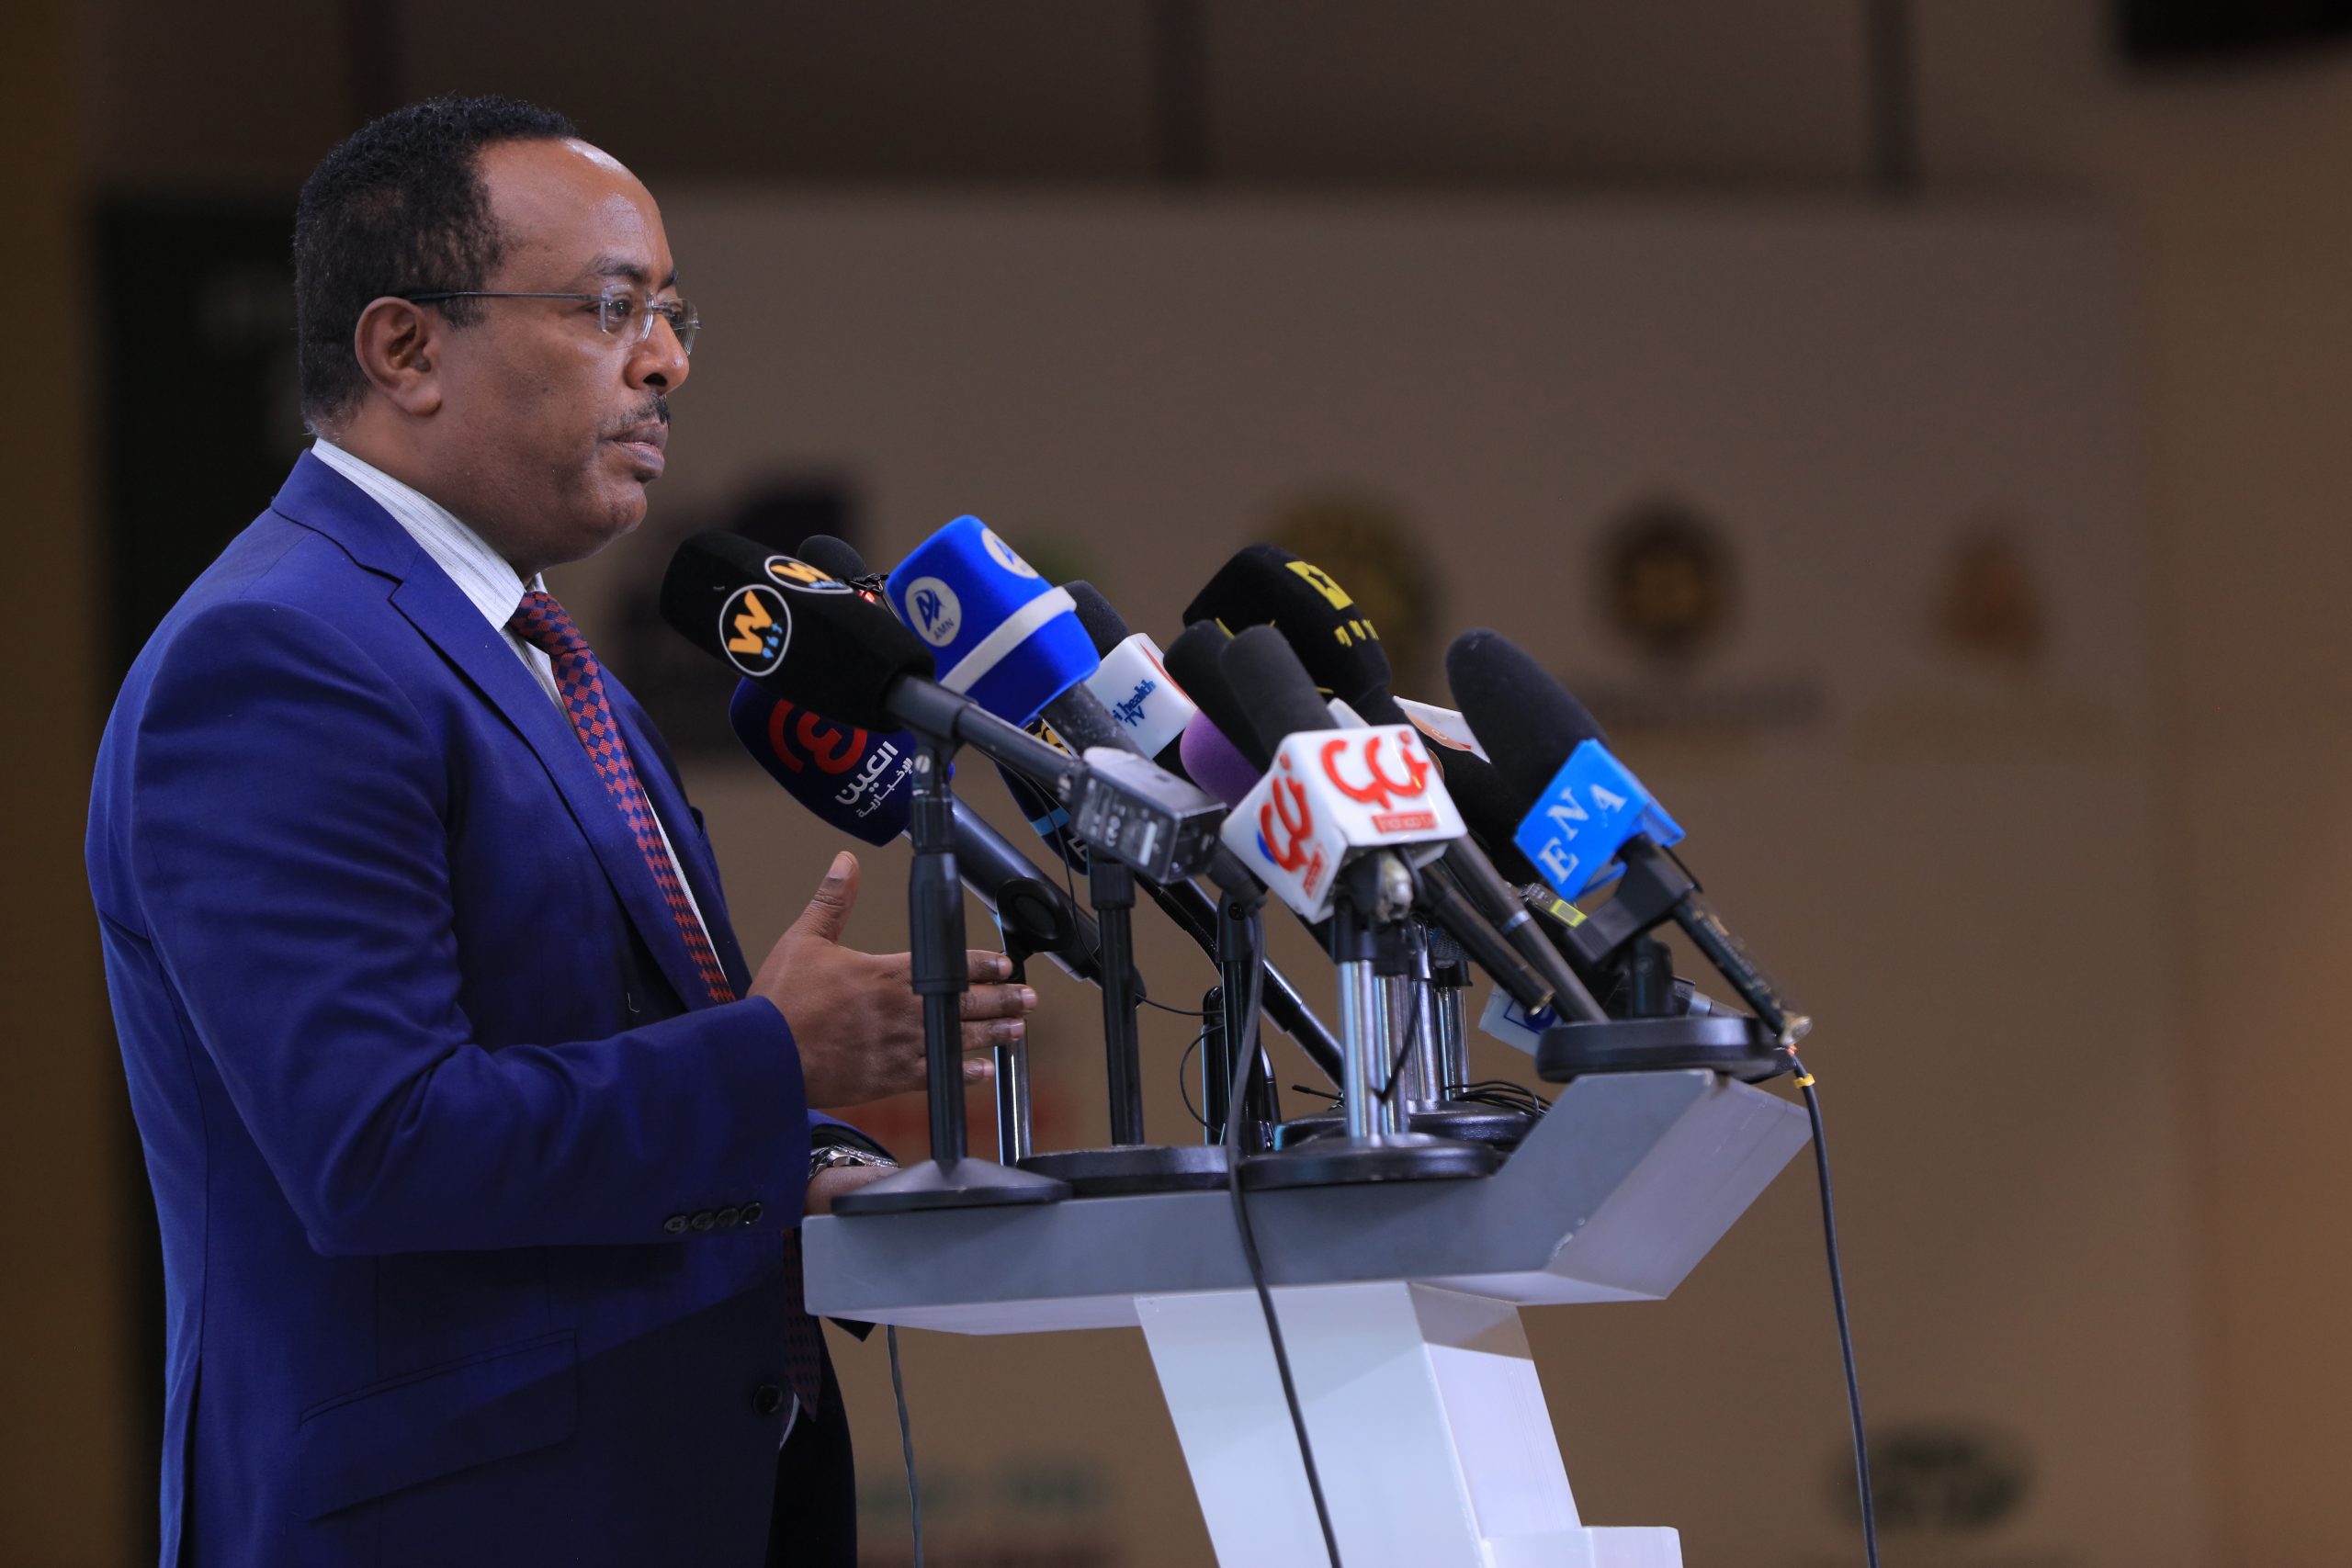 Ethiopia hosts a national investment forum that aims to promote its investment potentials to Diaspora investors.